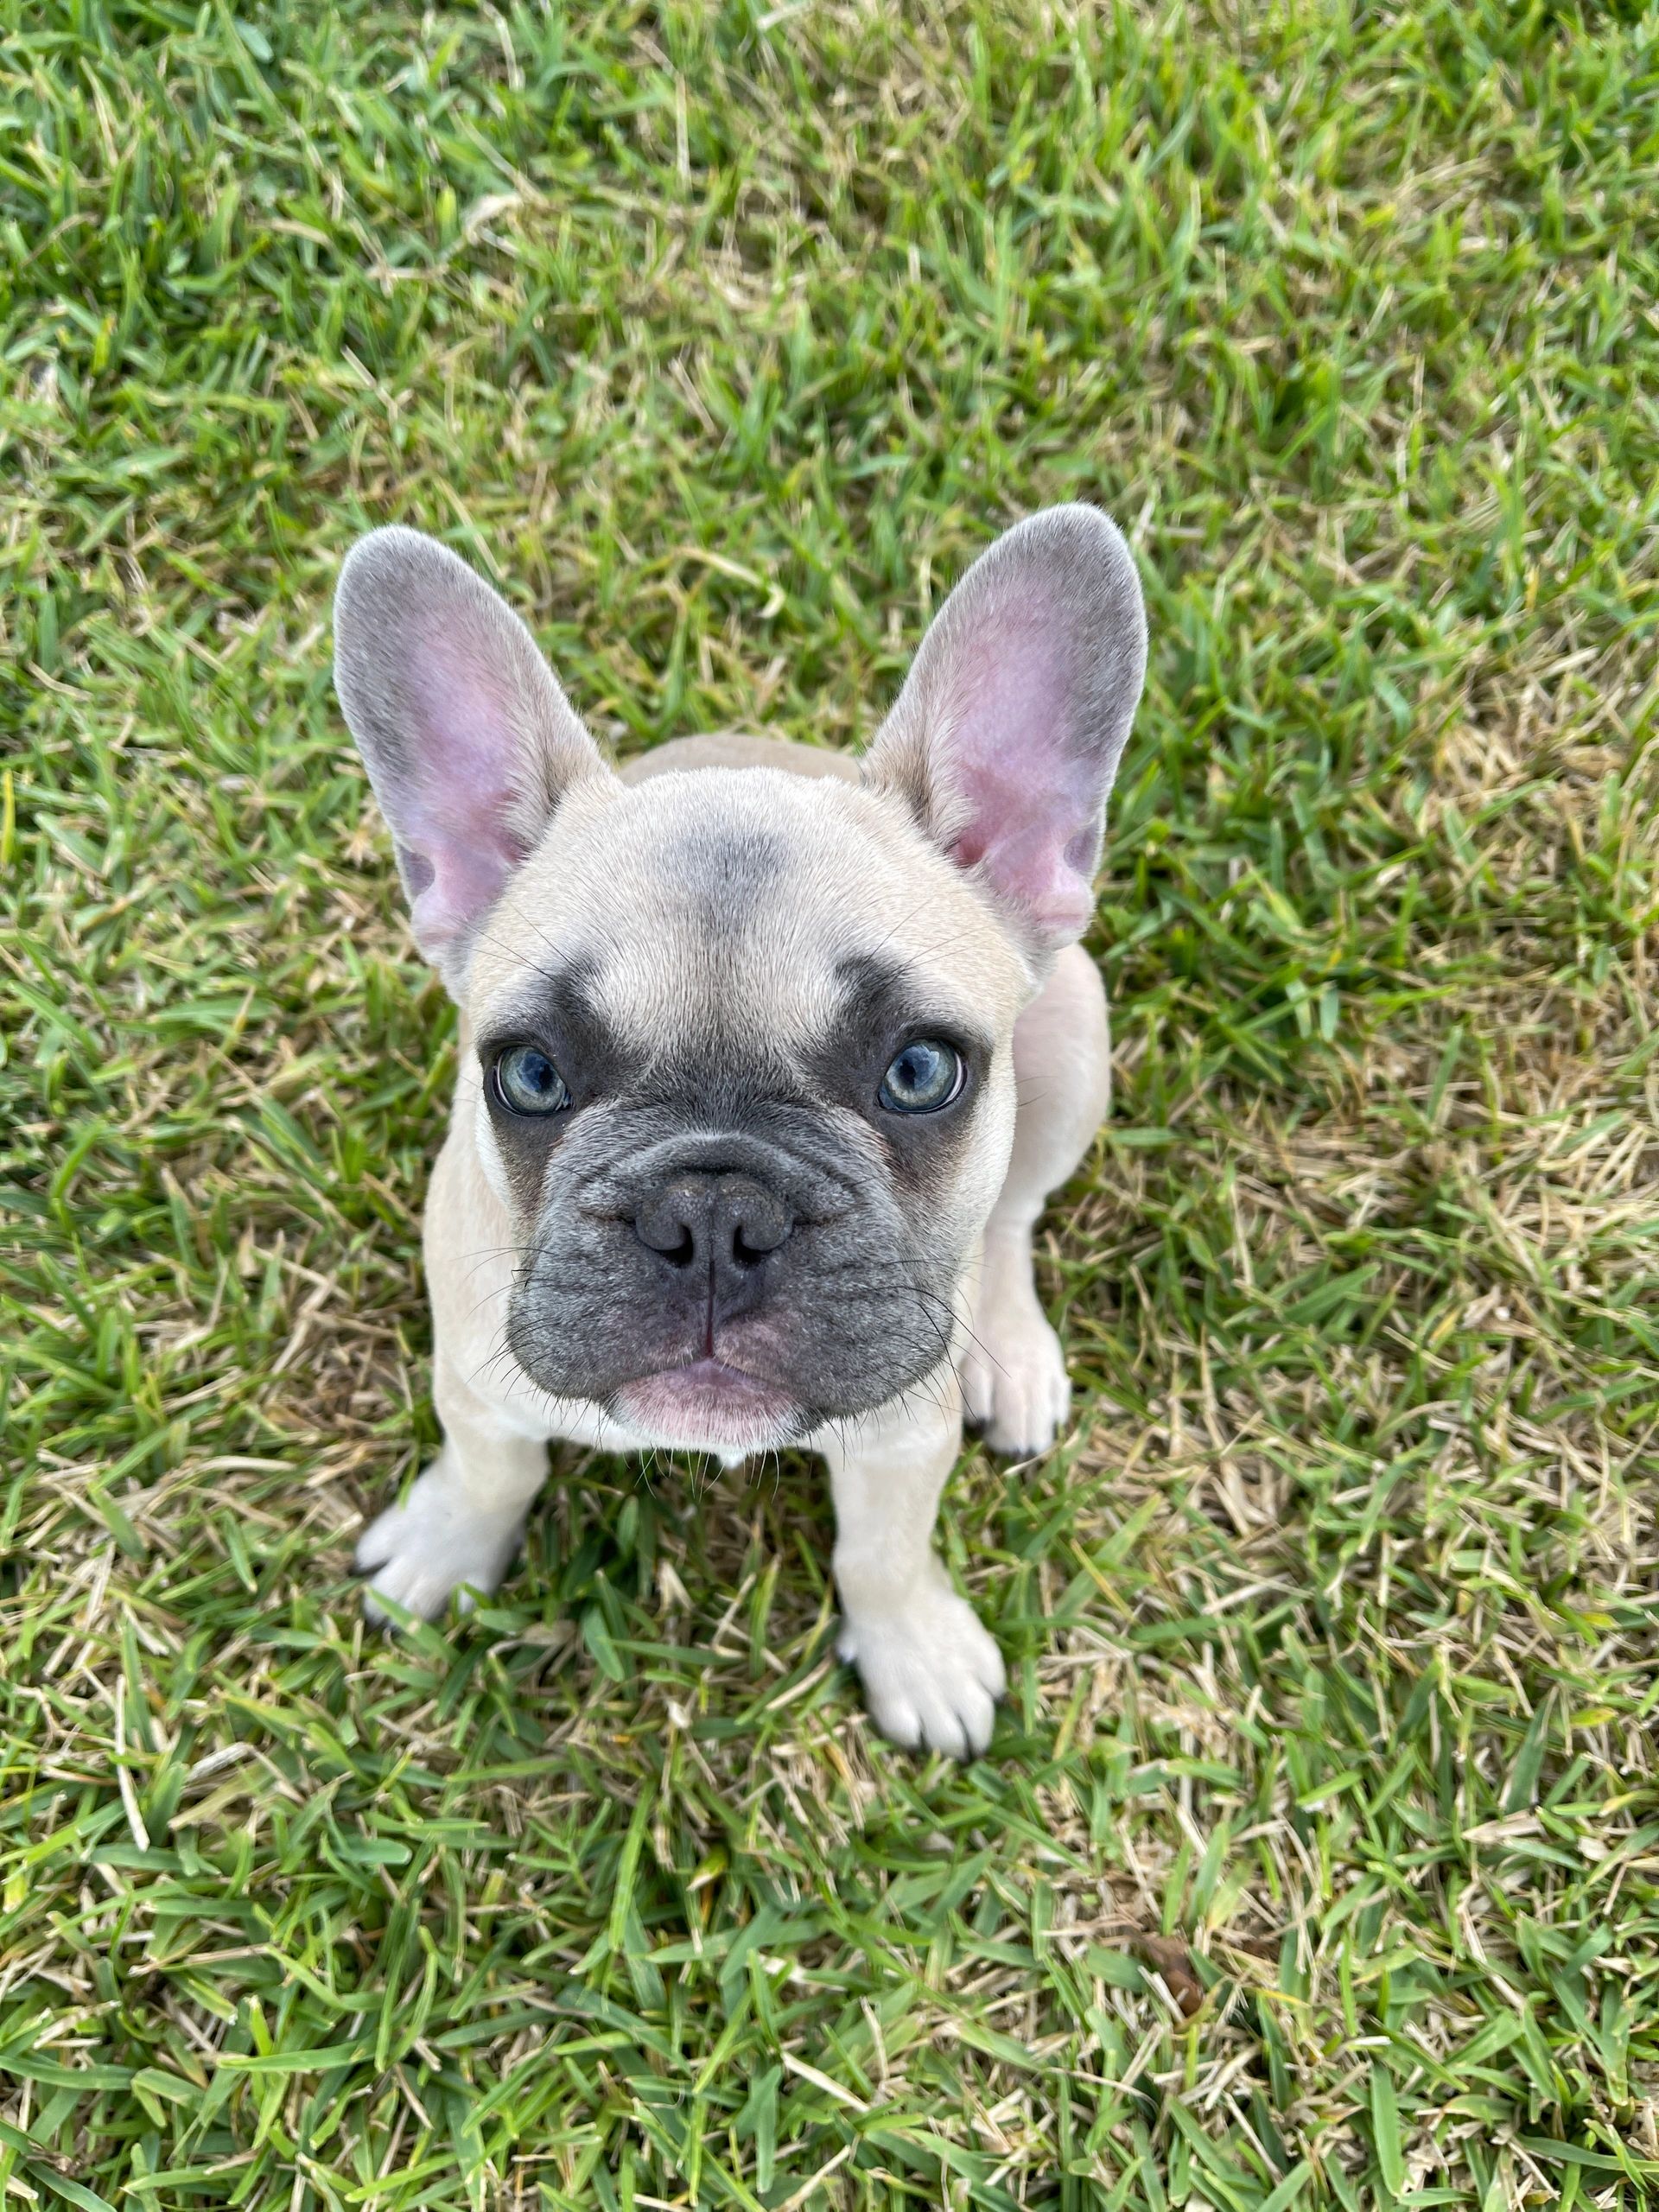 I Luv Frenchies, llc - Frenchie Puppy, Dog Breeders, Puppies for Sale